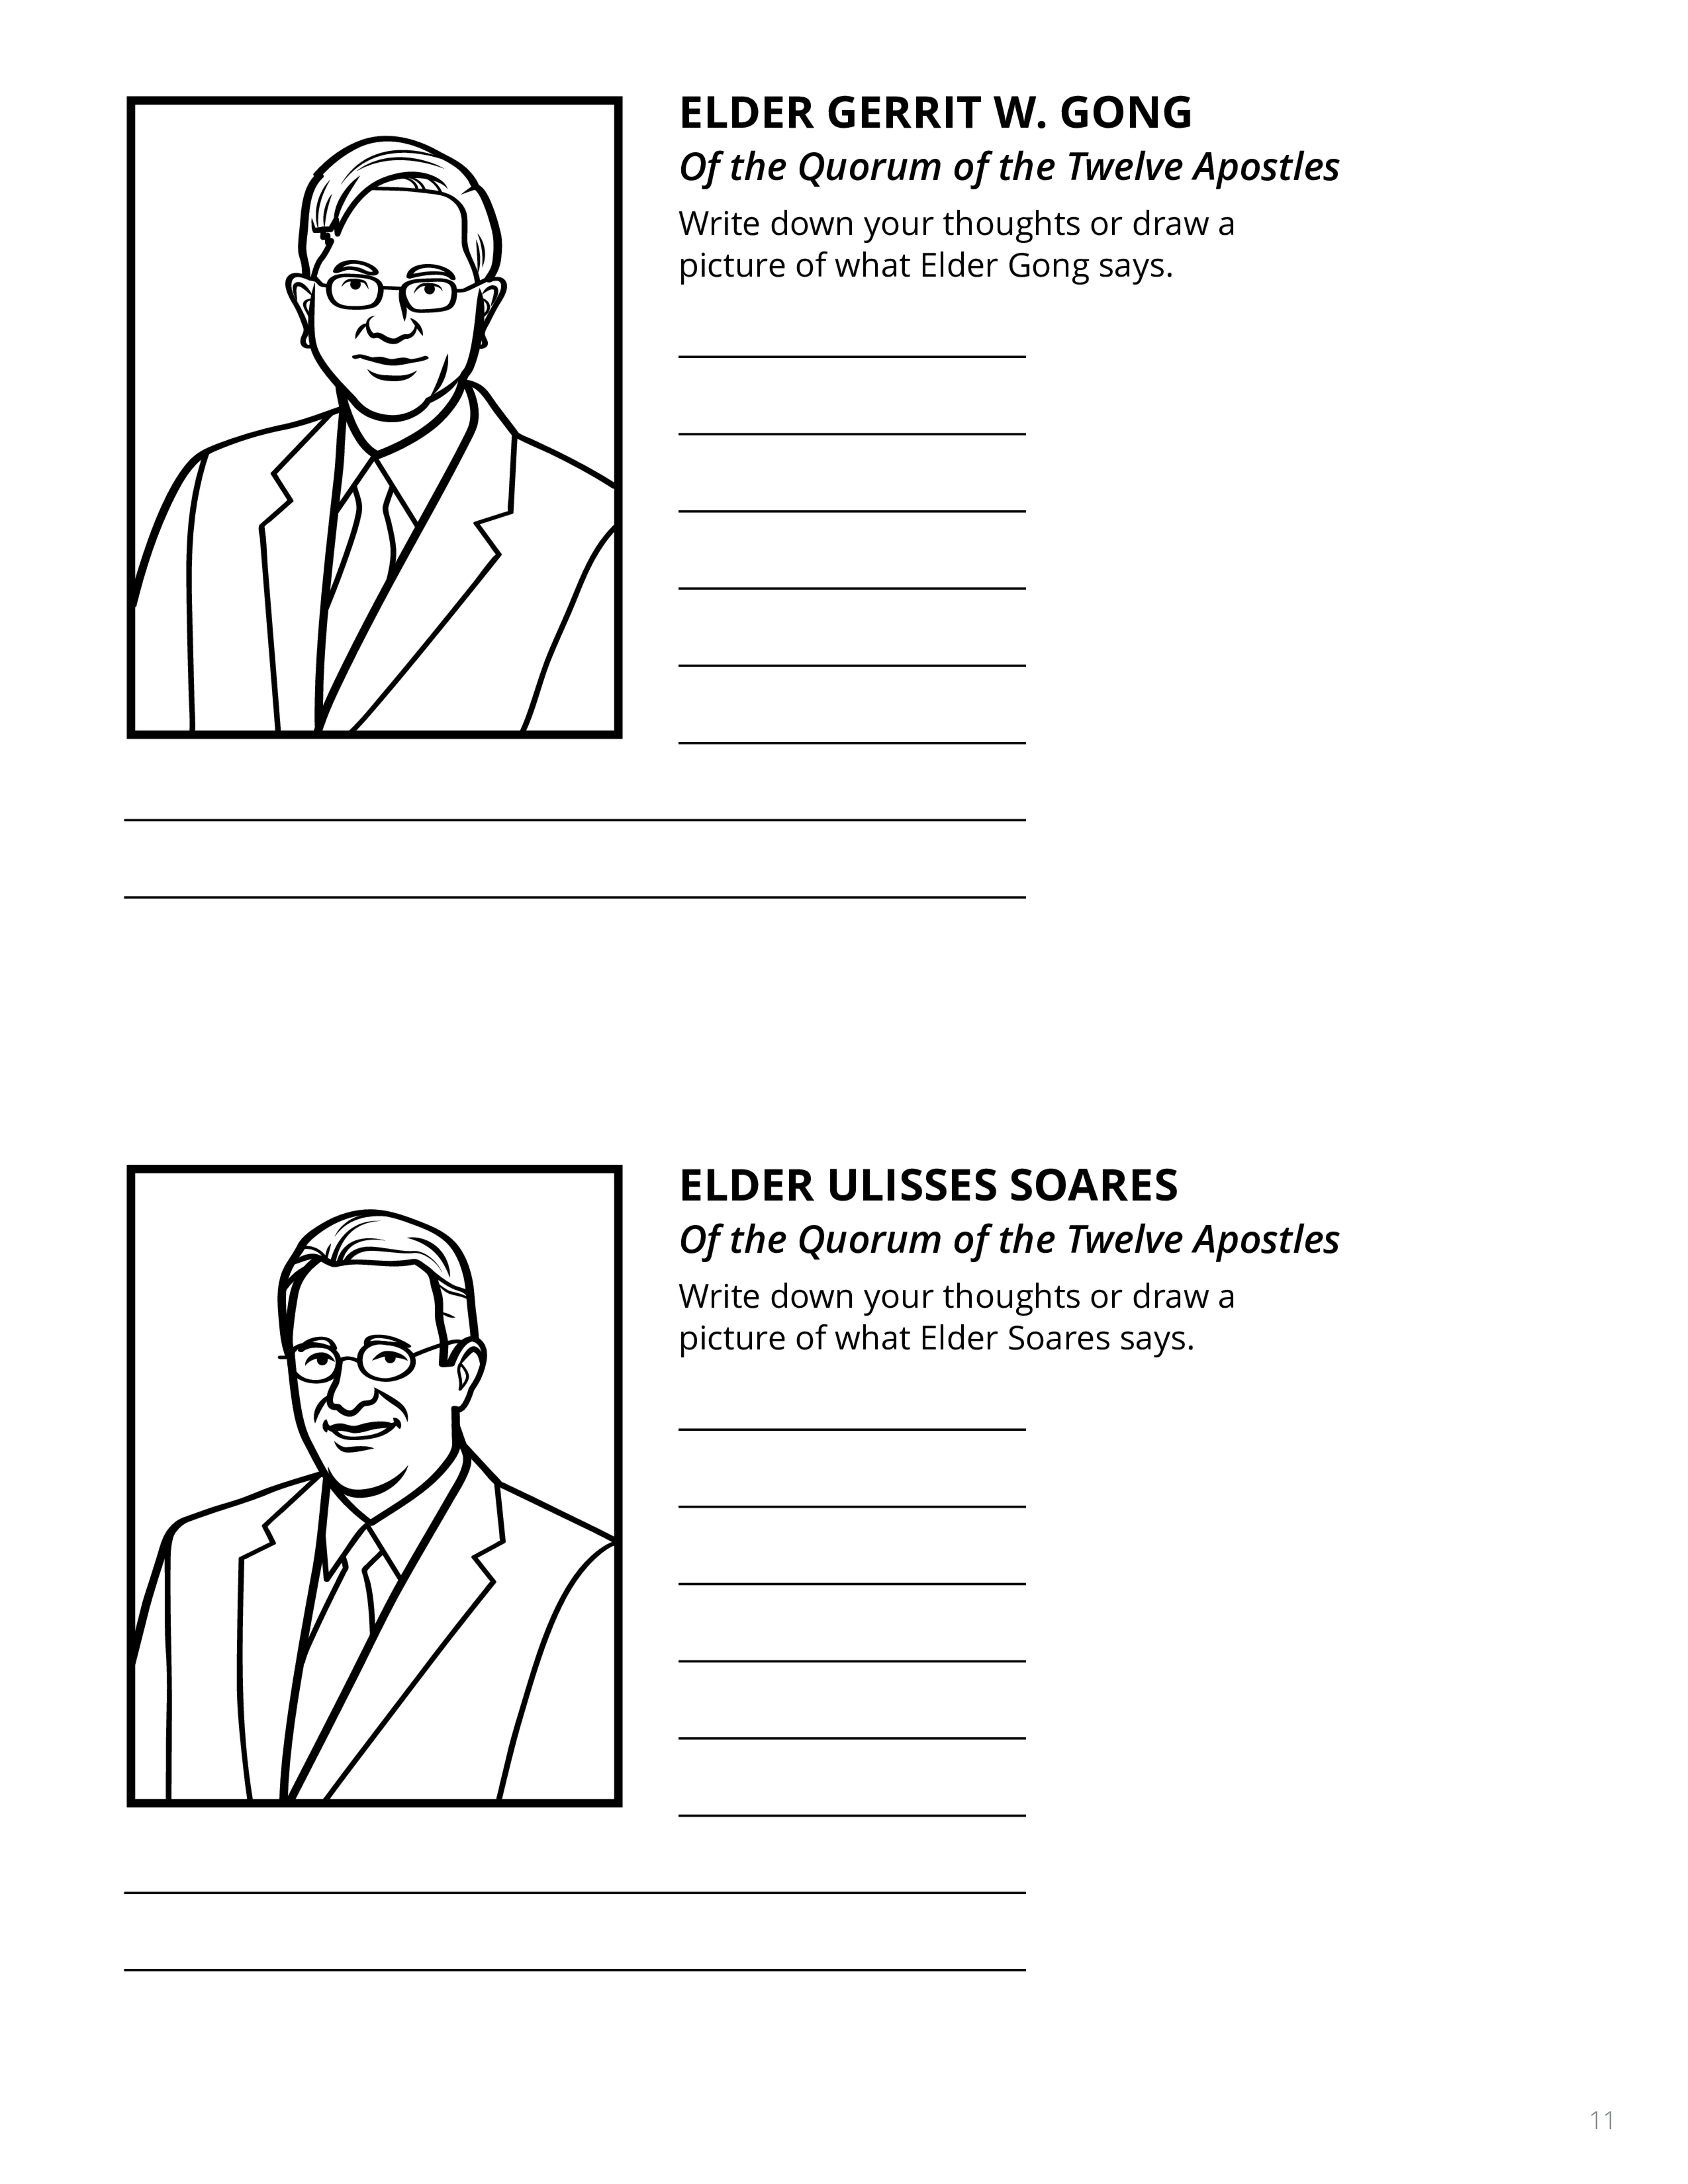 An activity page to encourage children to listen and write down thoughts or draw a picture of what Gerrit W. Gong and Ulisses Soares say.